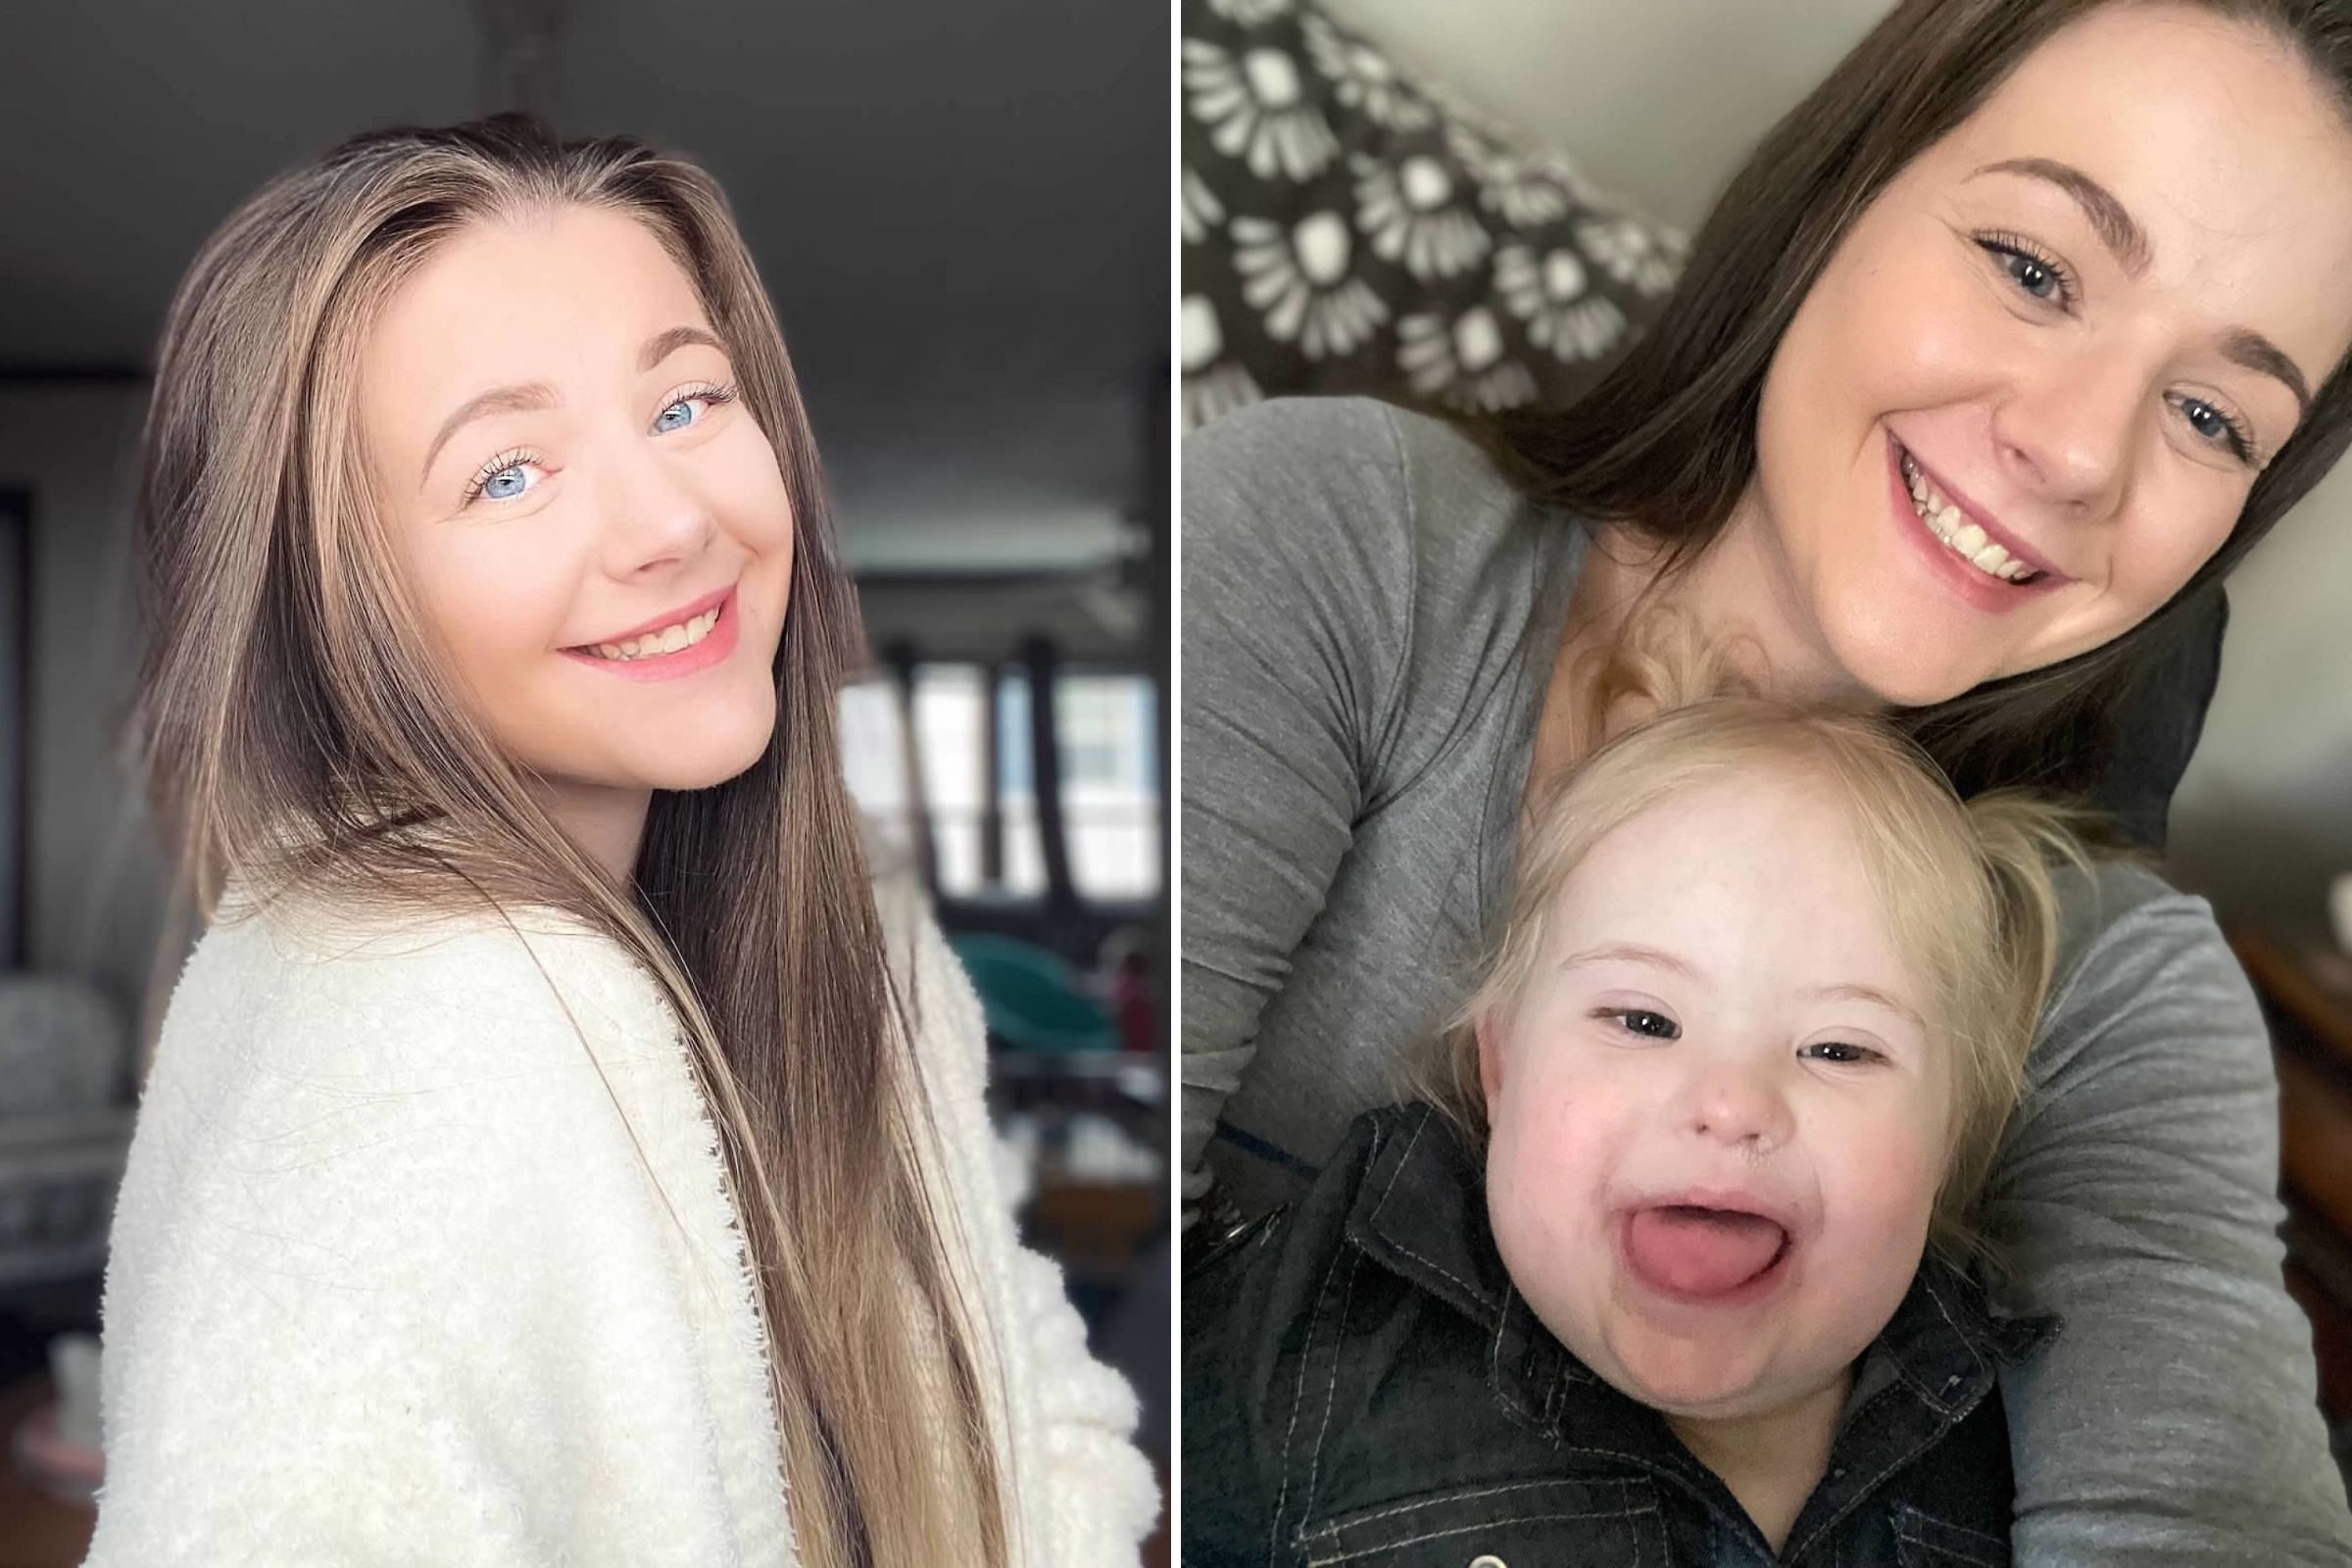 I found out I had Down syndrome aged 23 – people don't believe I